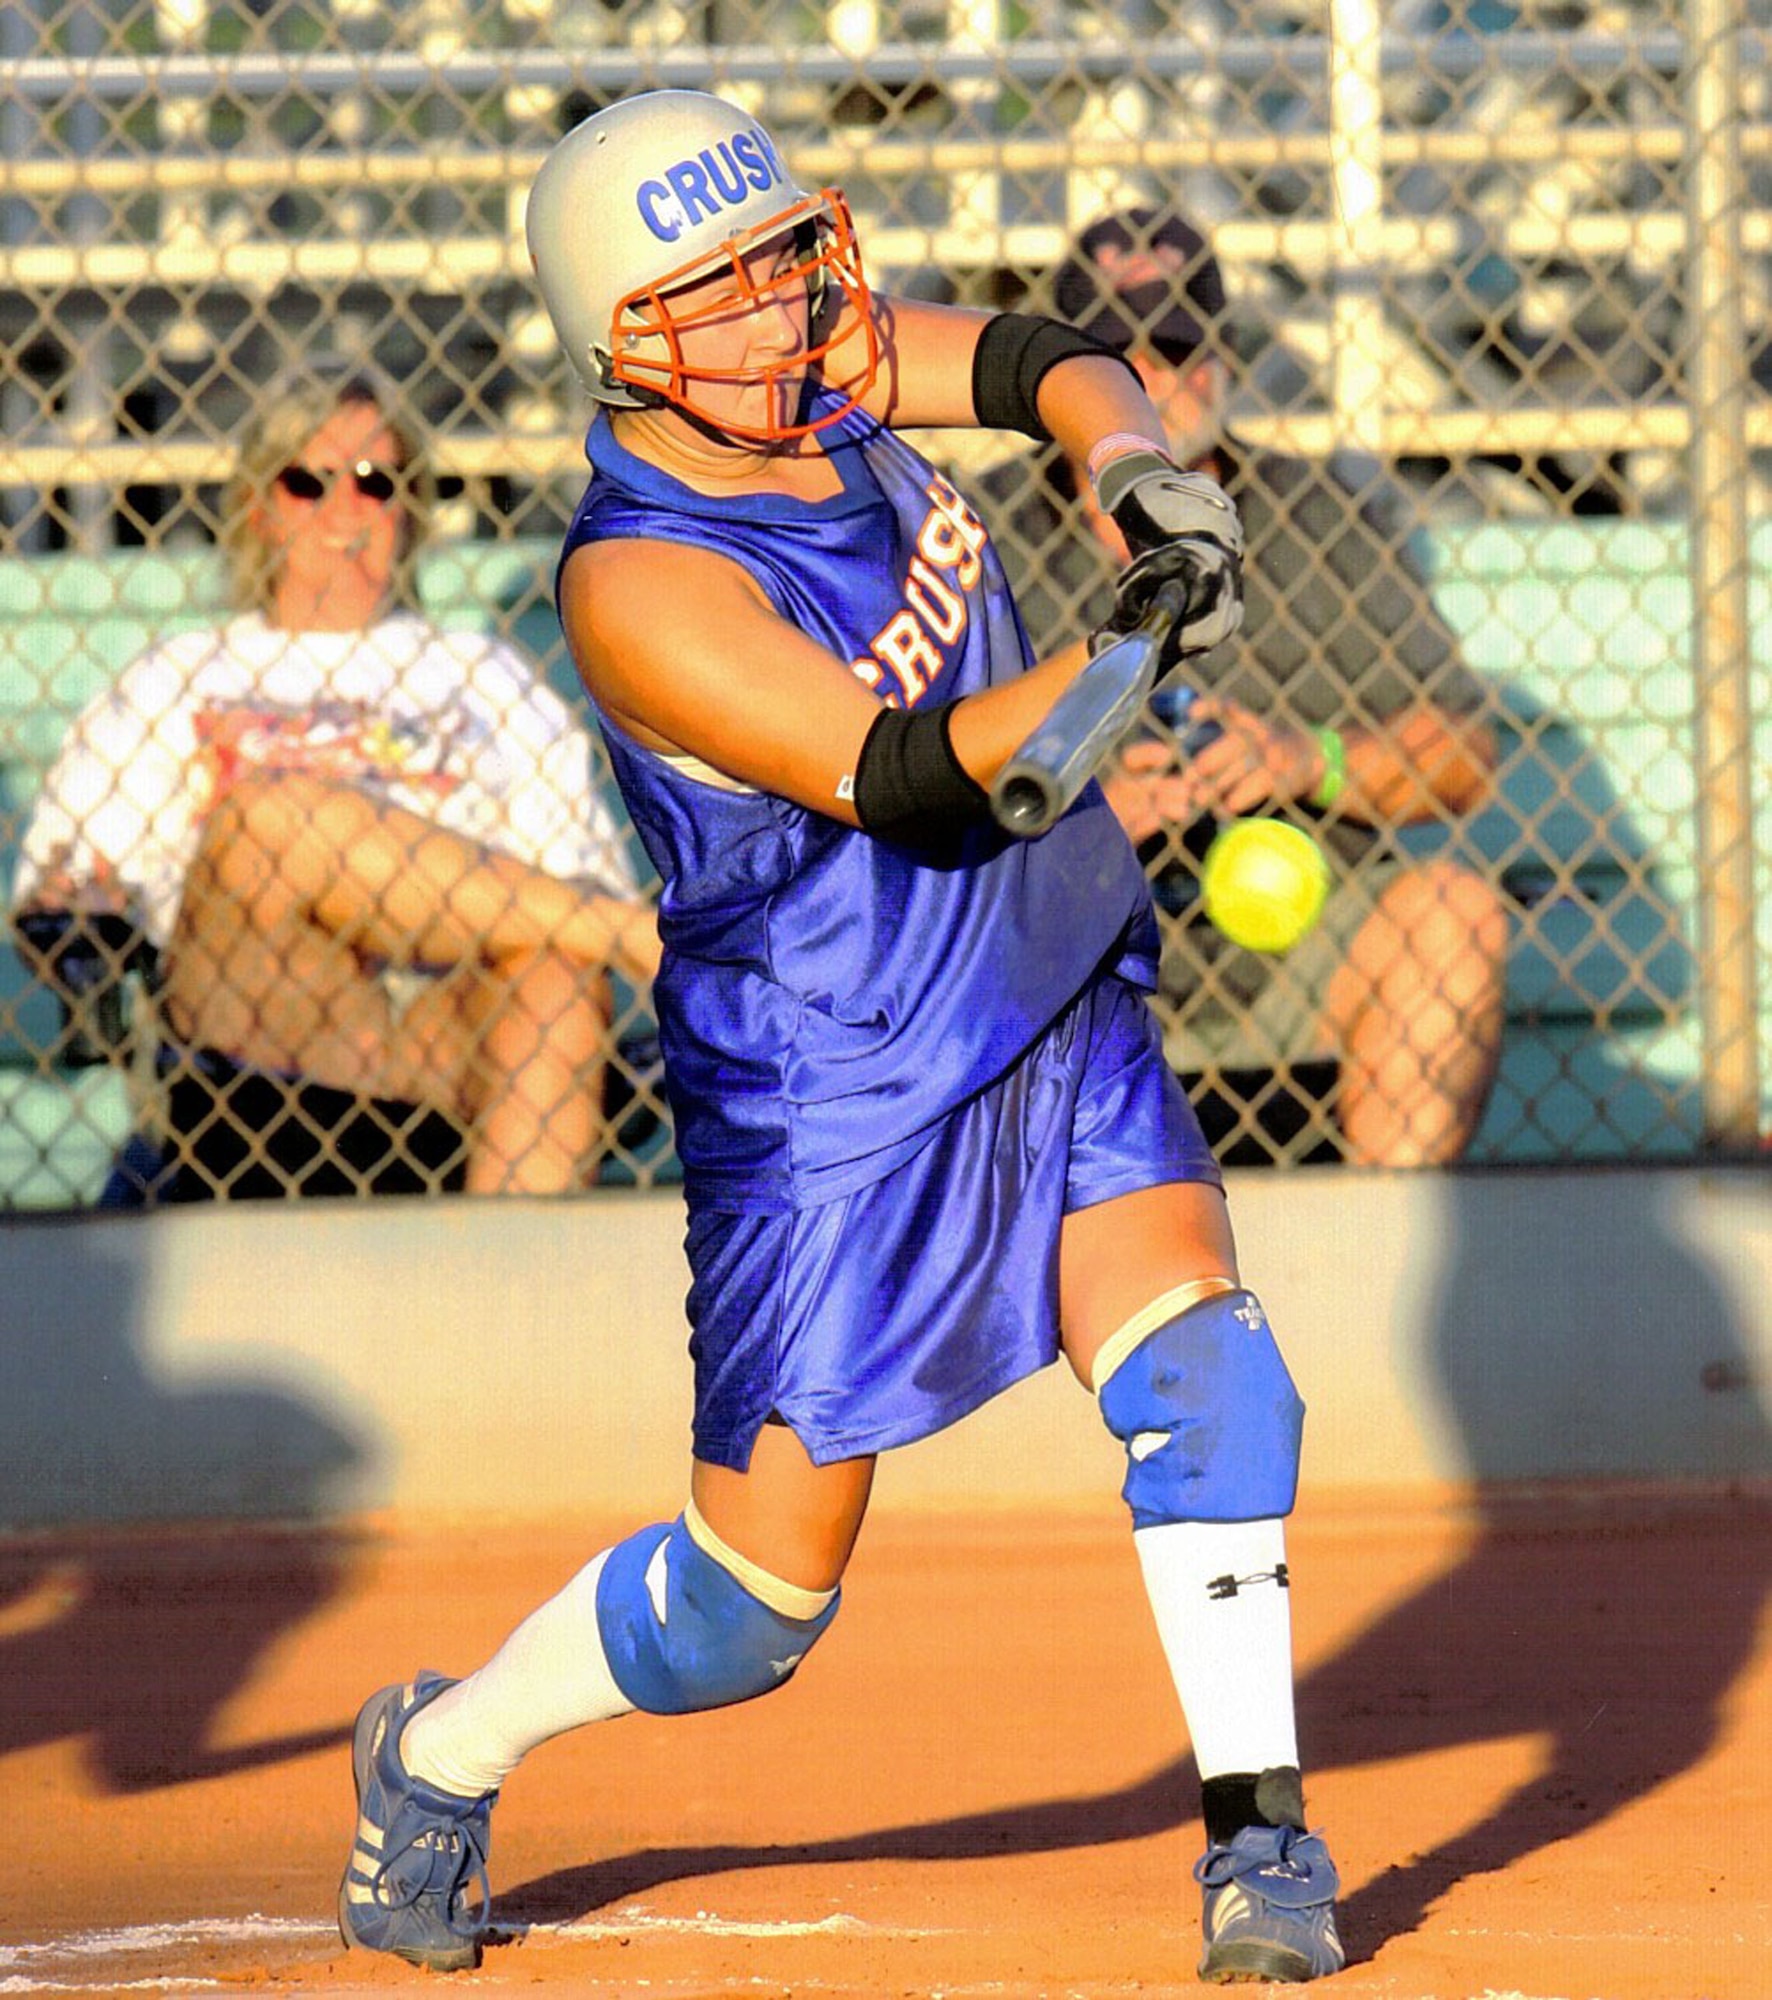 Dawn Brodersen, Desert High School senior, hits the ball during an American Softball Association 18-and-under Western Nationals game. Ms. Brodersen signed a national letter of intent to play for the University of California-Riverside. (Courtesy photo)